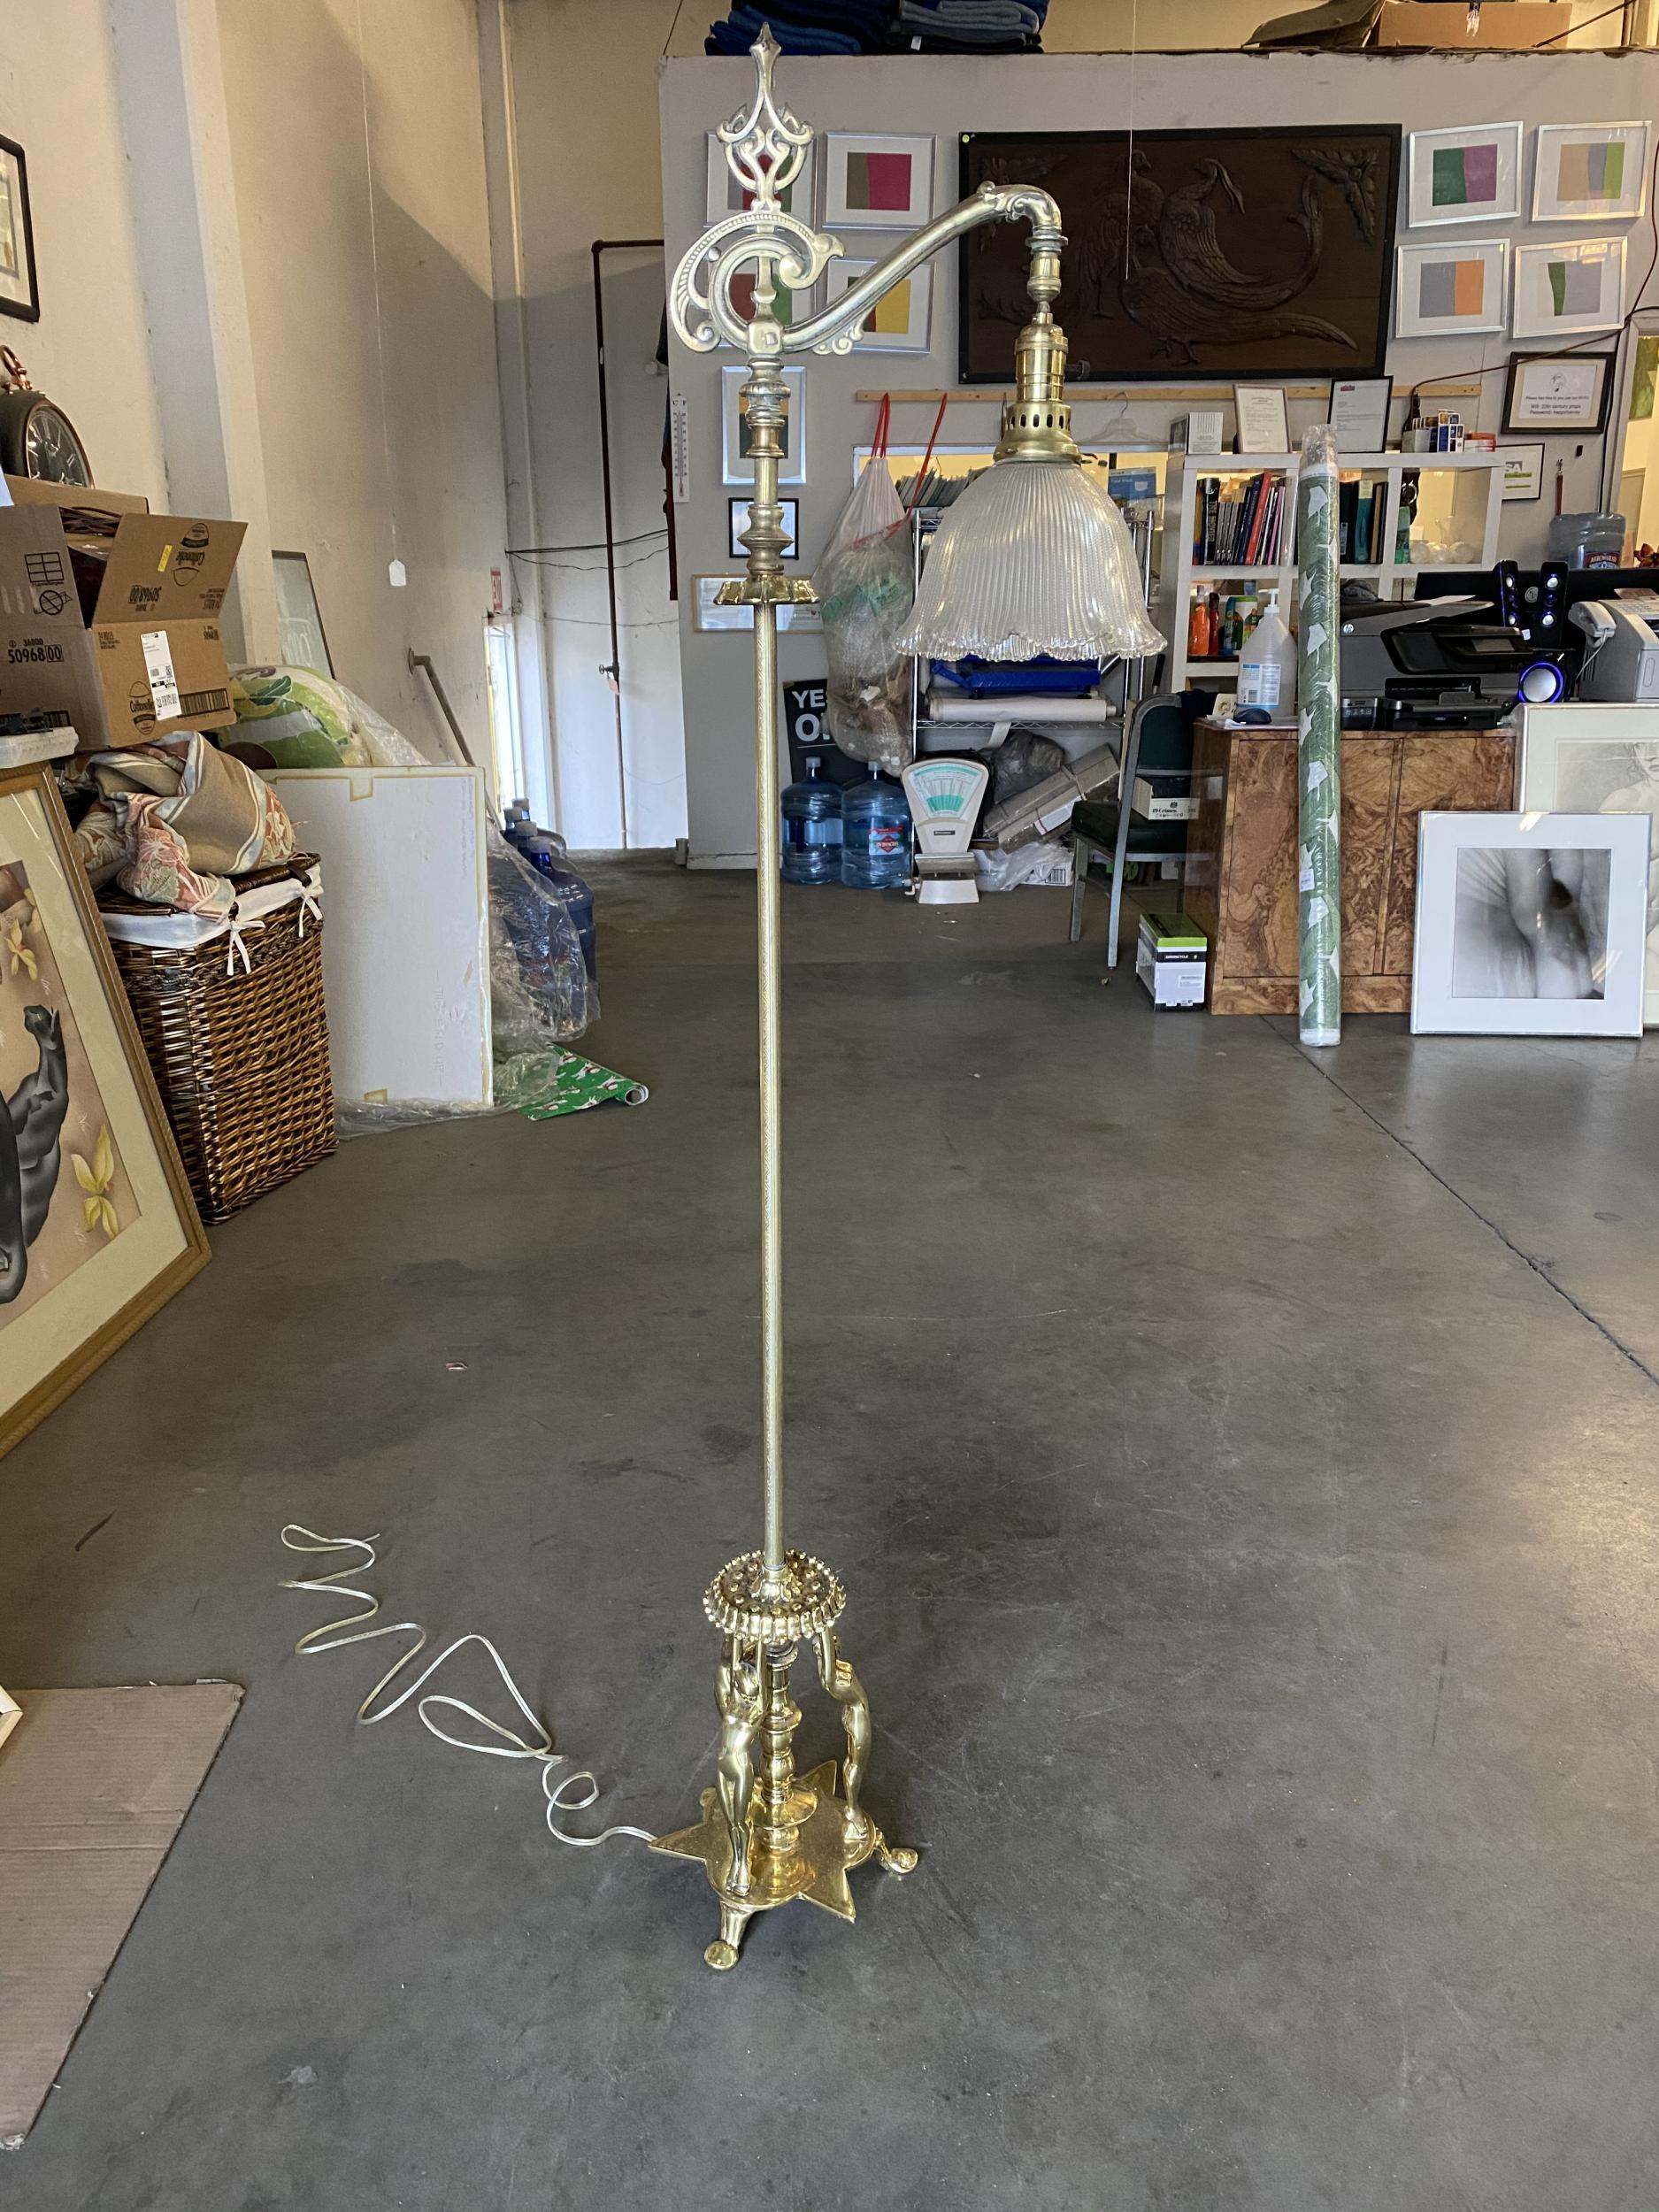 Rare1930s Frankart reading floor lamp with a base featuring three nude nymphs.

The reading lamp comes with a 1920s period decorated glass shade

Frankart Inc.

Arthur Frankenberg began designing and producing bookends in New York City in 1921. In